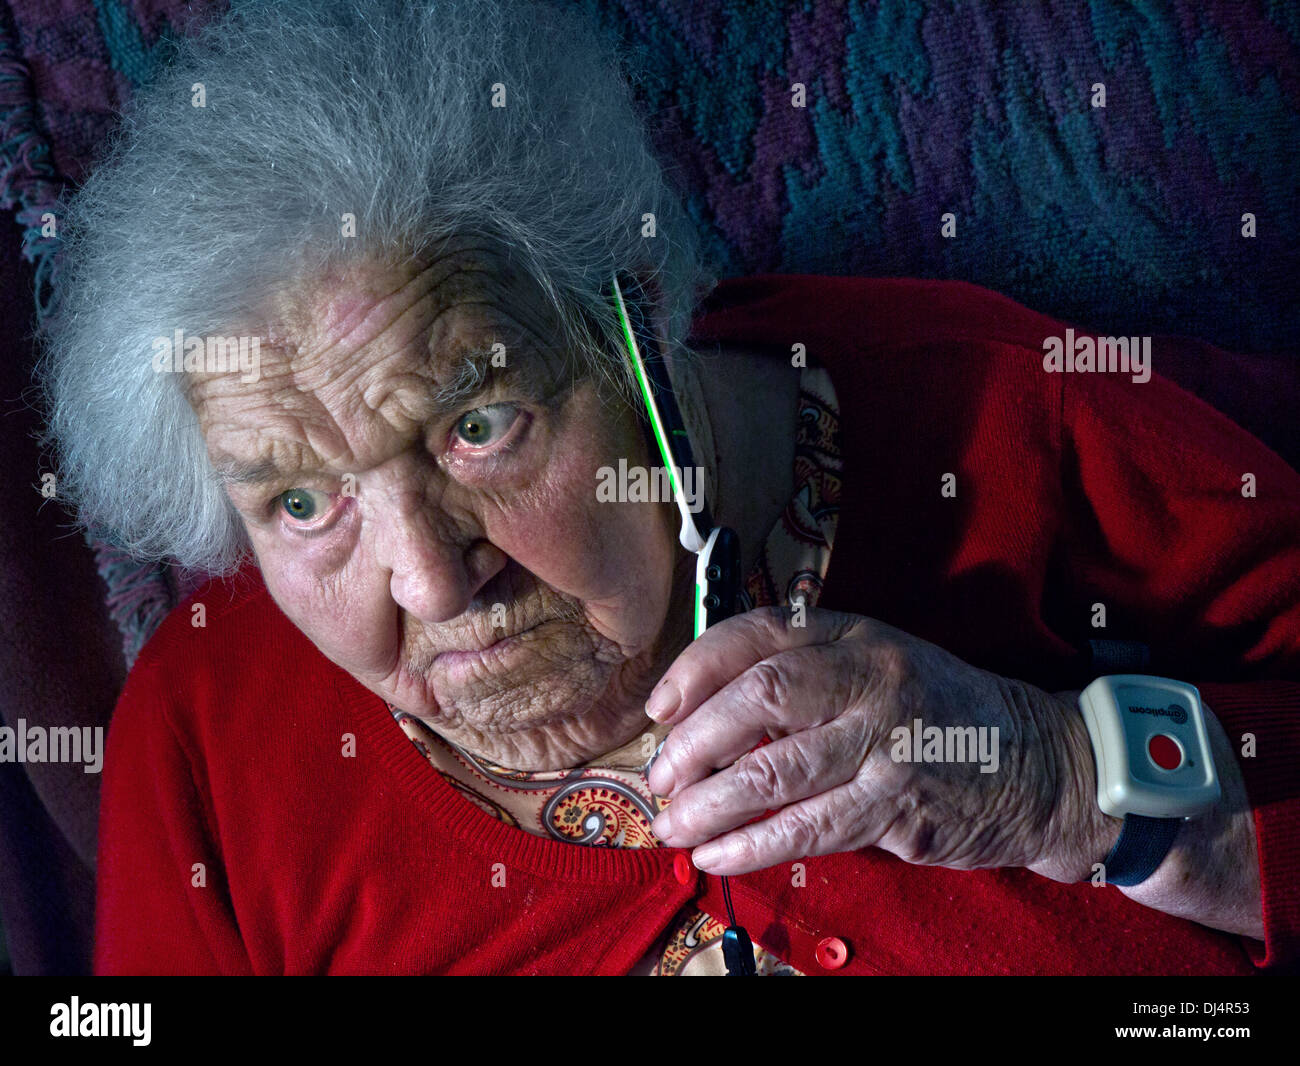 Vulnerable isolating covid-19 elderly old senior lady wearing an emergency call button alone at home talks anxiously on her telephone Stock Photo